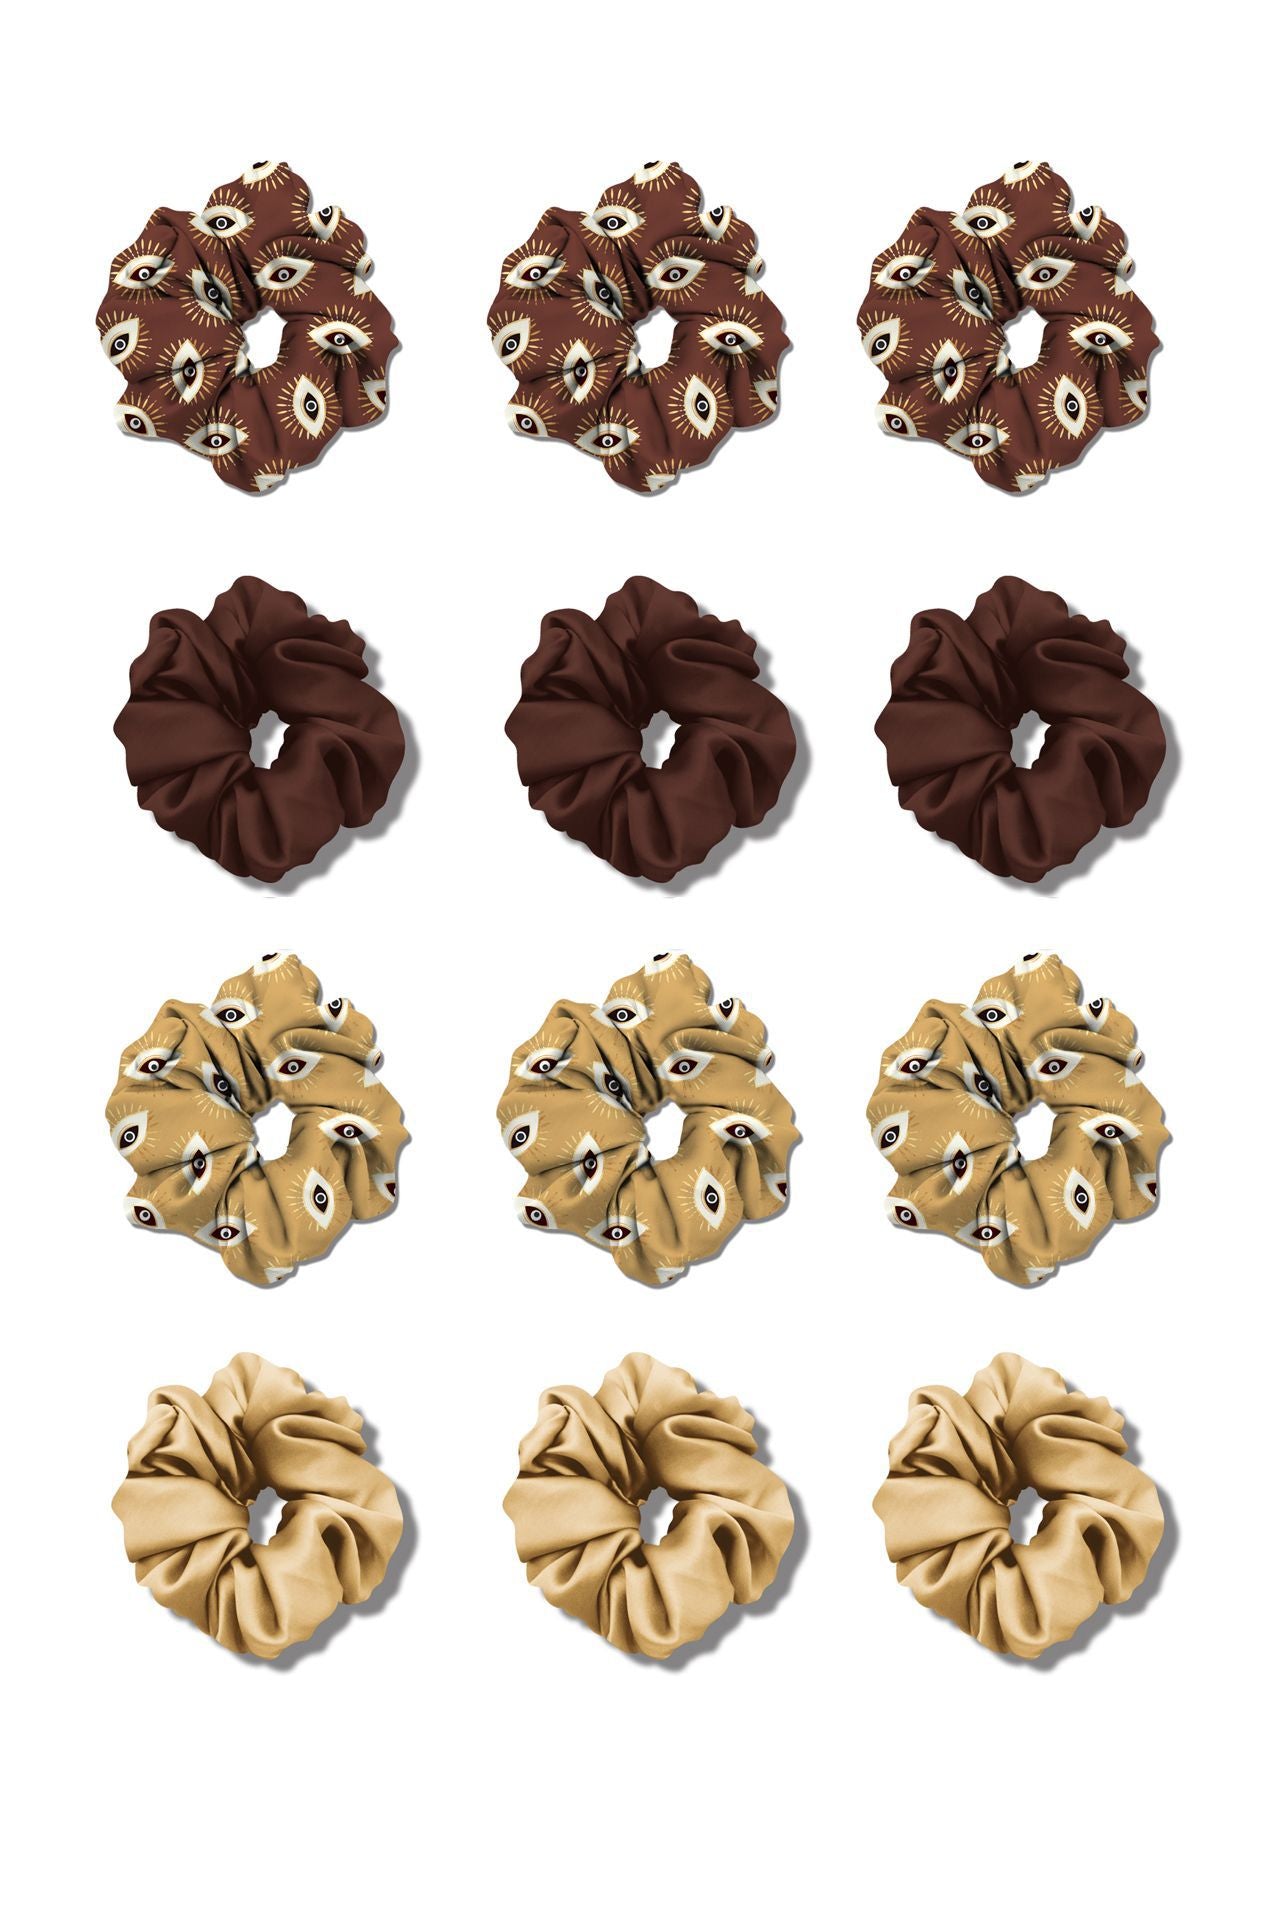 Limited Edition Scrunchie Gift Sets